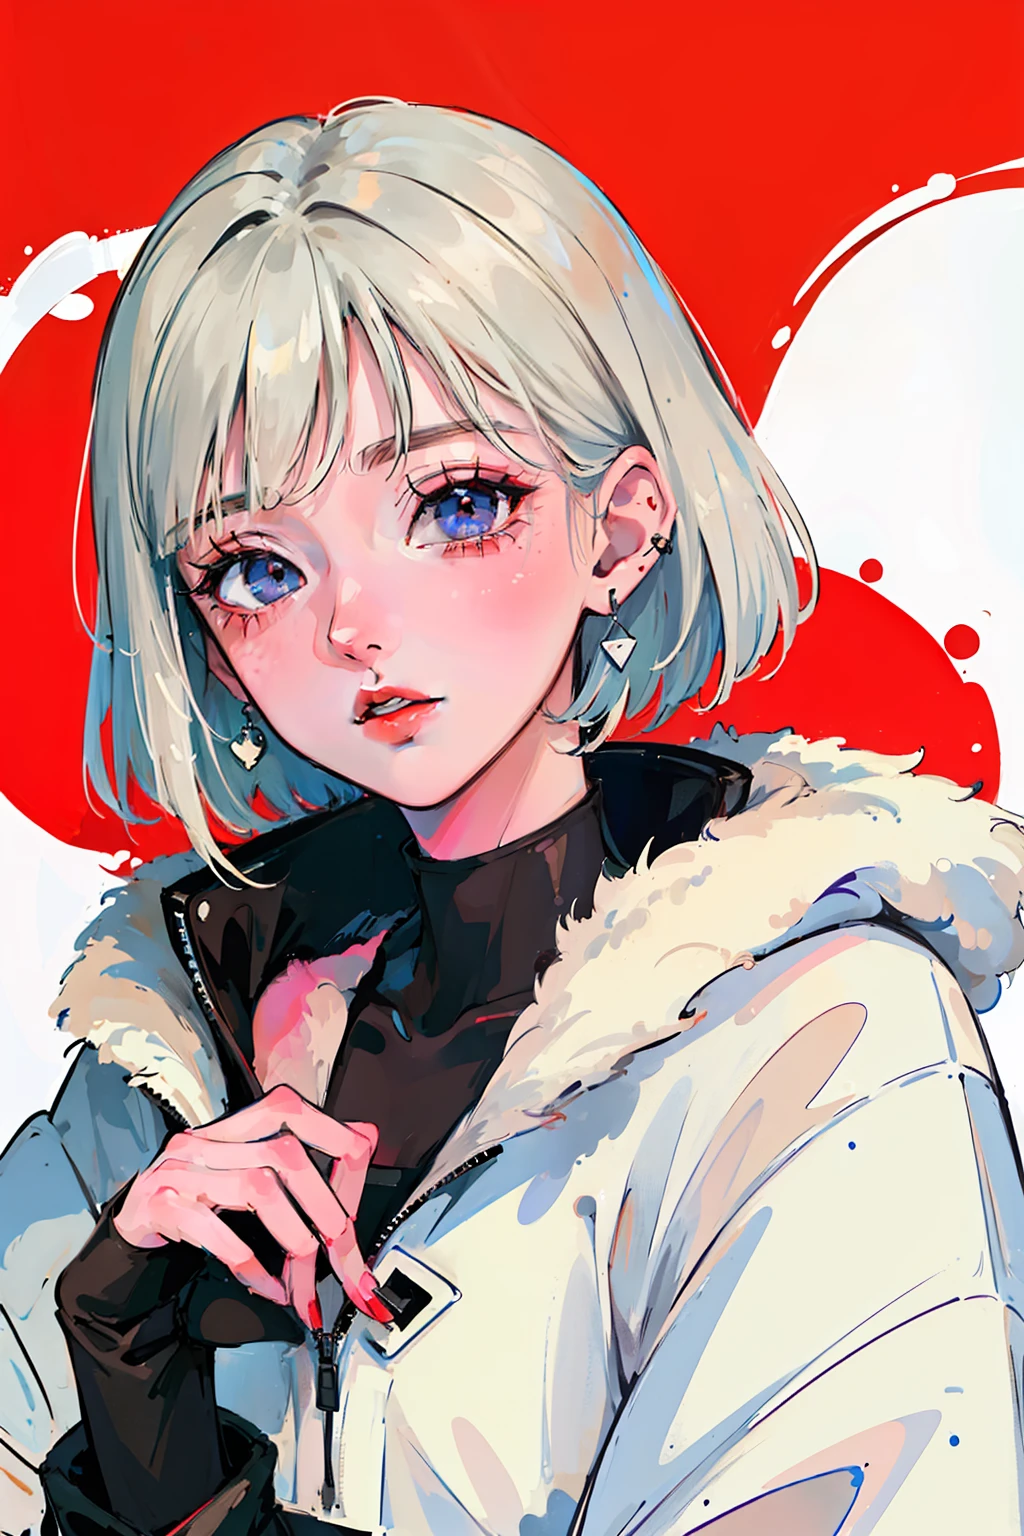 (Portrait:1.4), (masterpiece:1.2, best quality:1.2), top down, full body, 1white short haired girl, solo, Looking up, face focus, extremely detailed face, cold eyes, extremely detailed eyes, good looking, makeup, finger on lips, colored eyes red, white fur coat, black tights, earrings